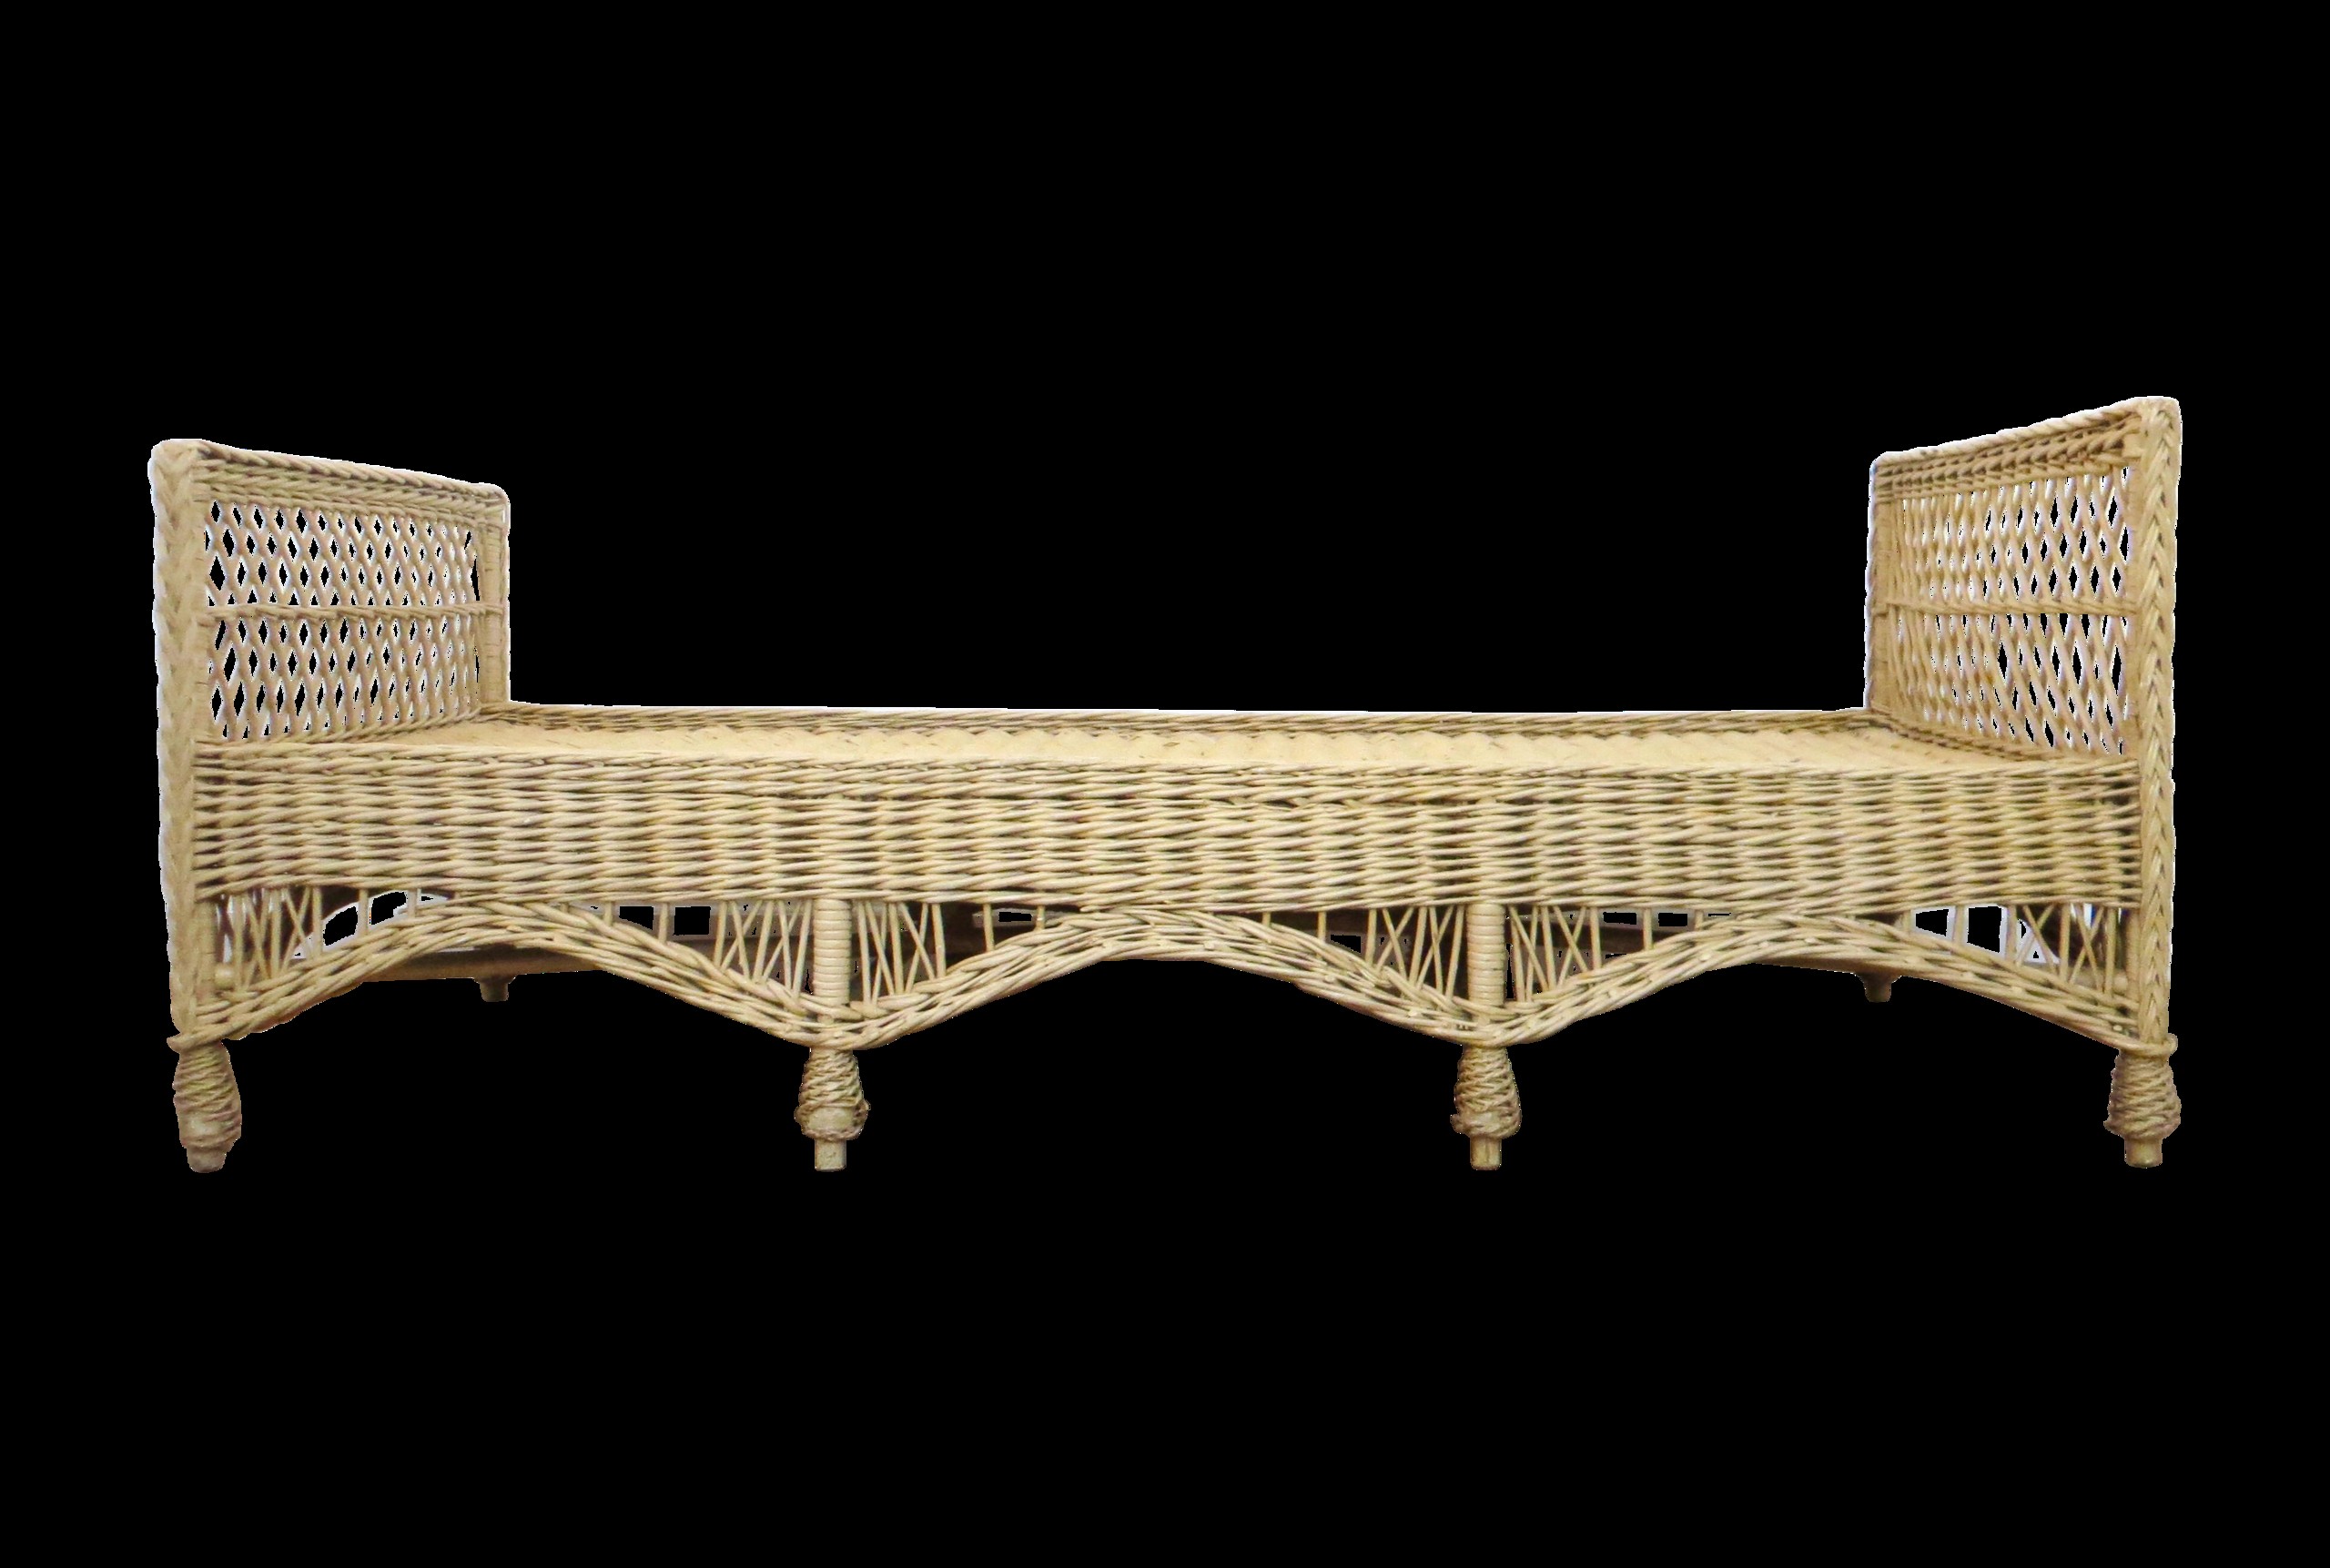 Vintage wicker rattan daybed by bar harbor chairish